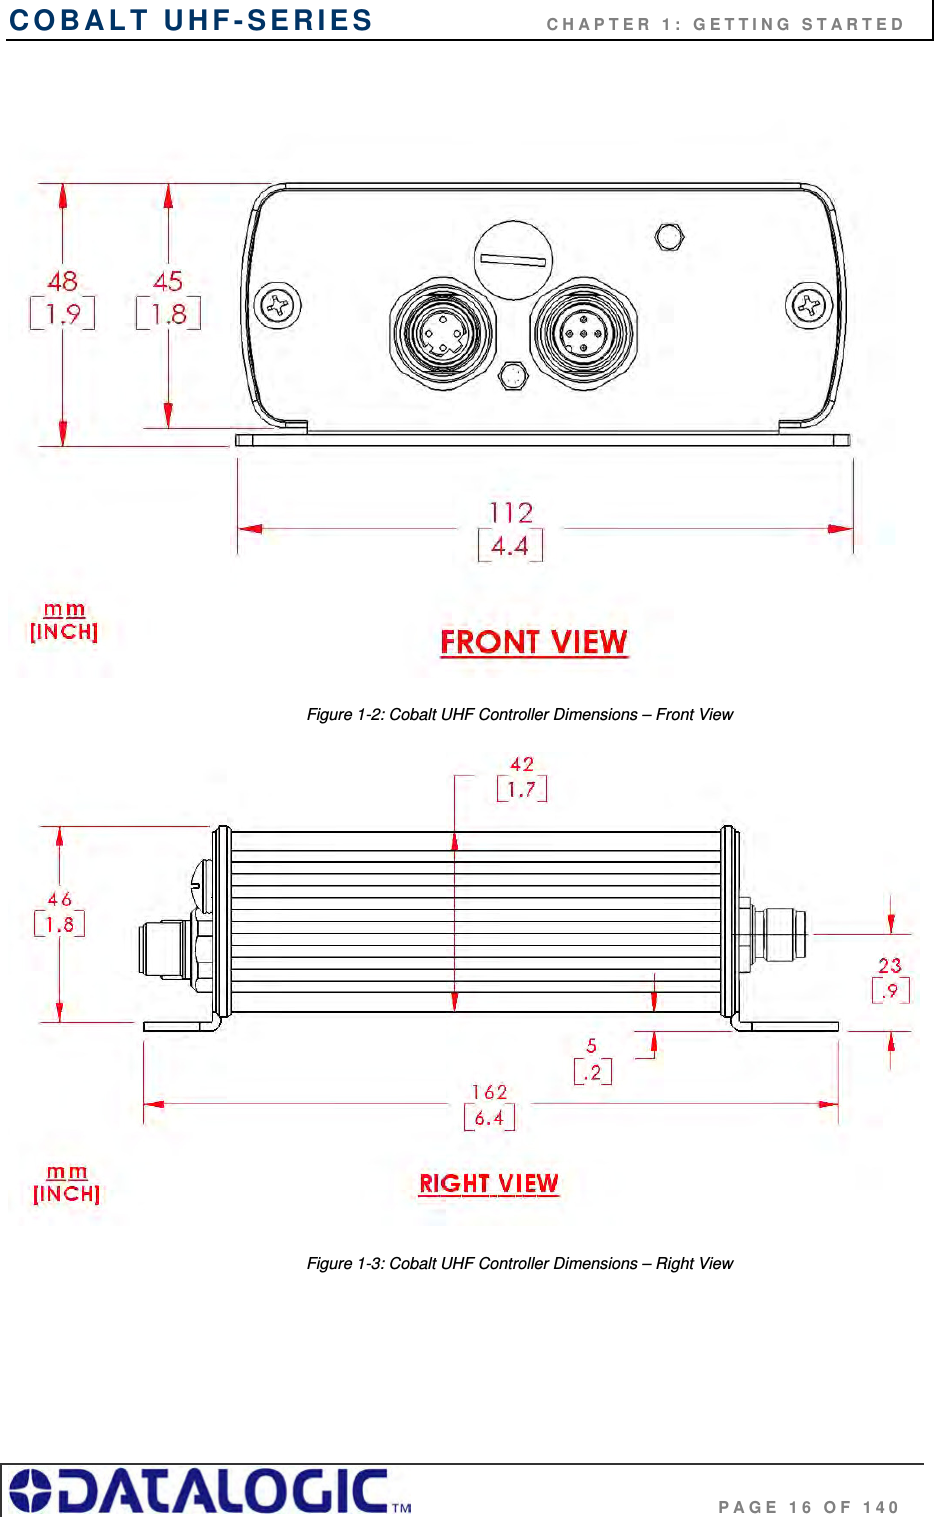 COBALT UHF-SERIES                    CHAPTER 1: GETTING STARTED                                     PAGE 16 OF 140  Figure 1-2: Cobalt UHF Controller Dimensions – Front View  Figure 1-3: Cobalt UHF Controller Dimensions – Right View 